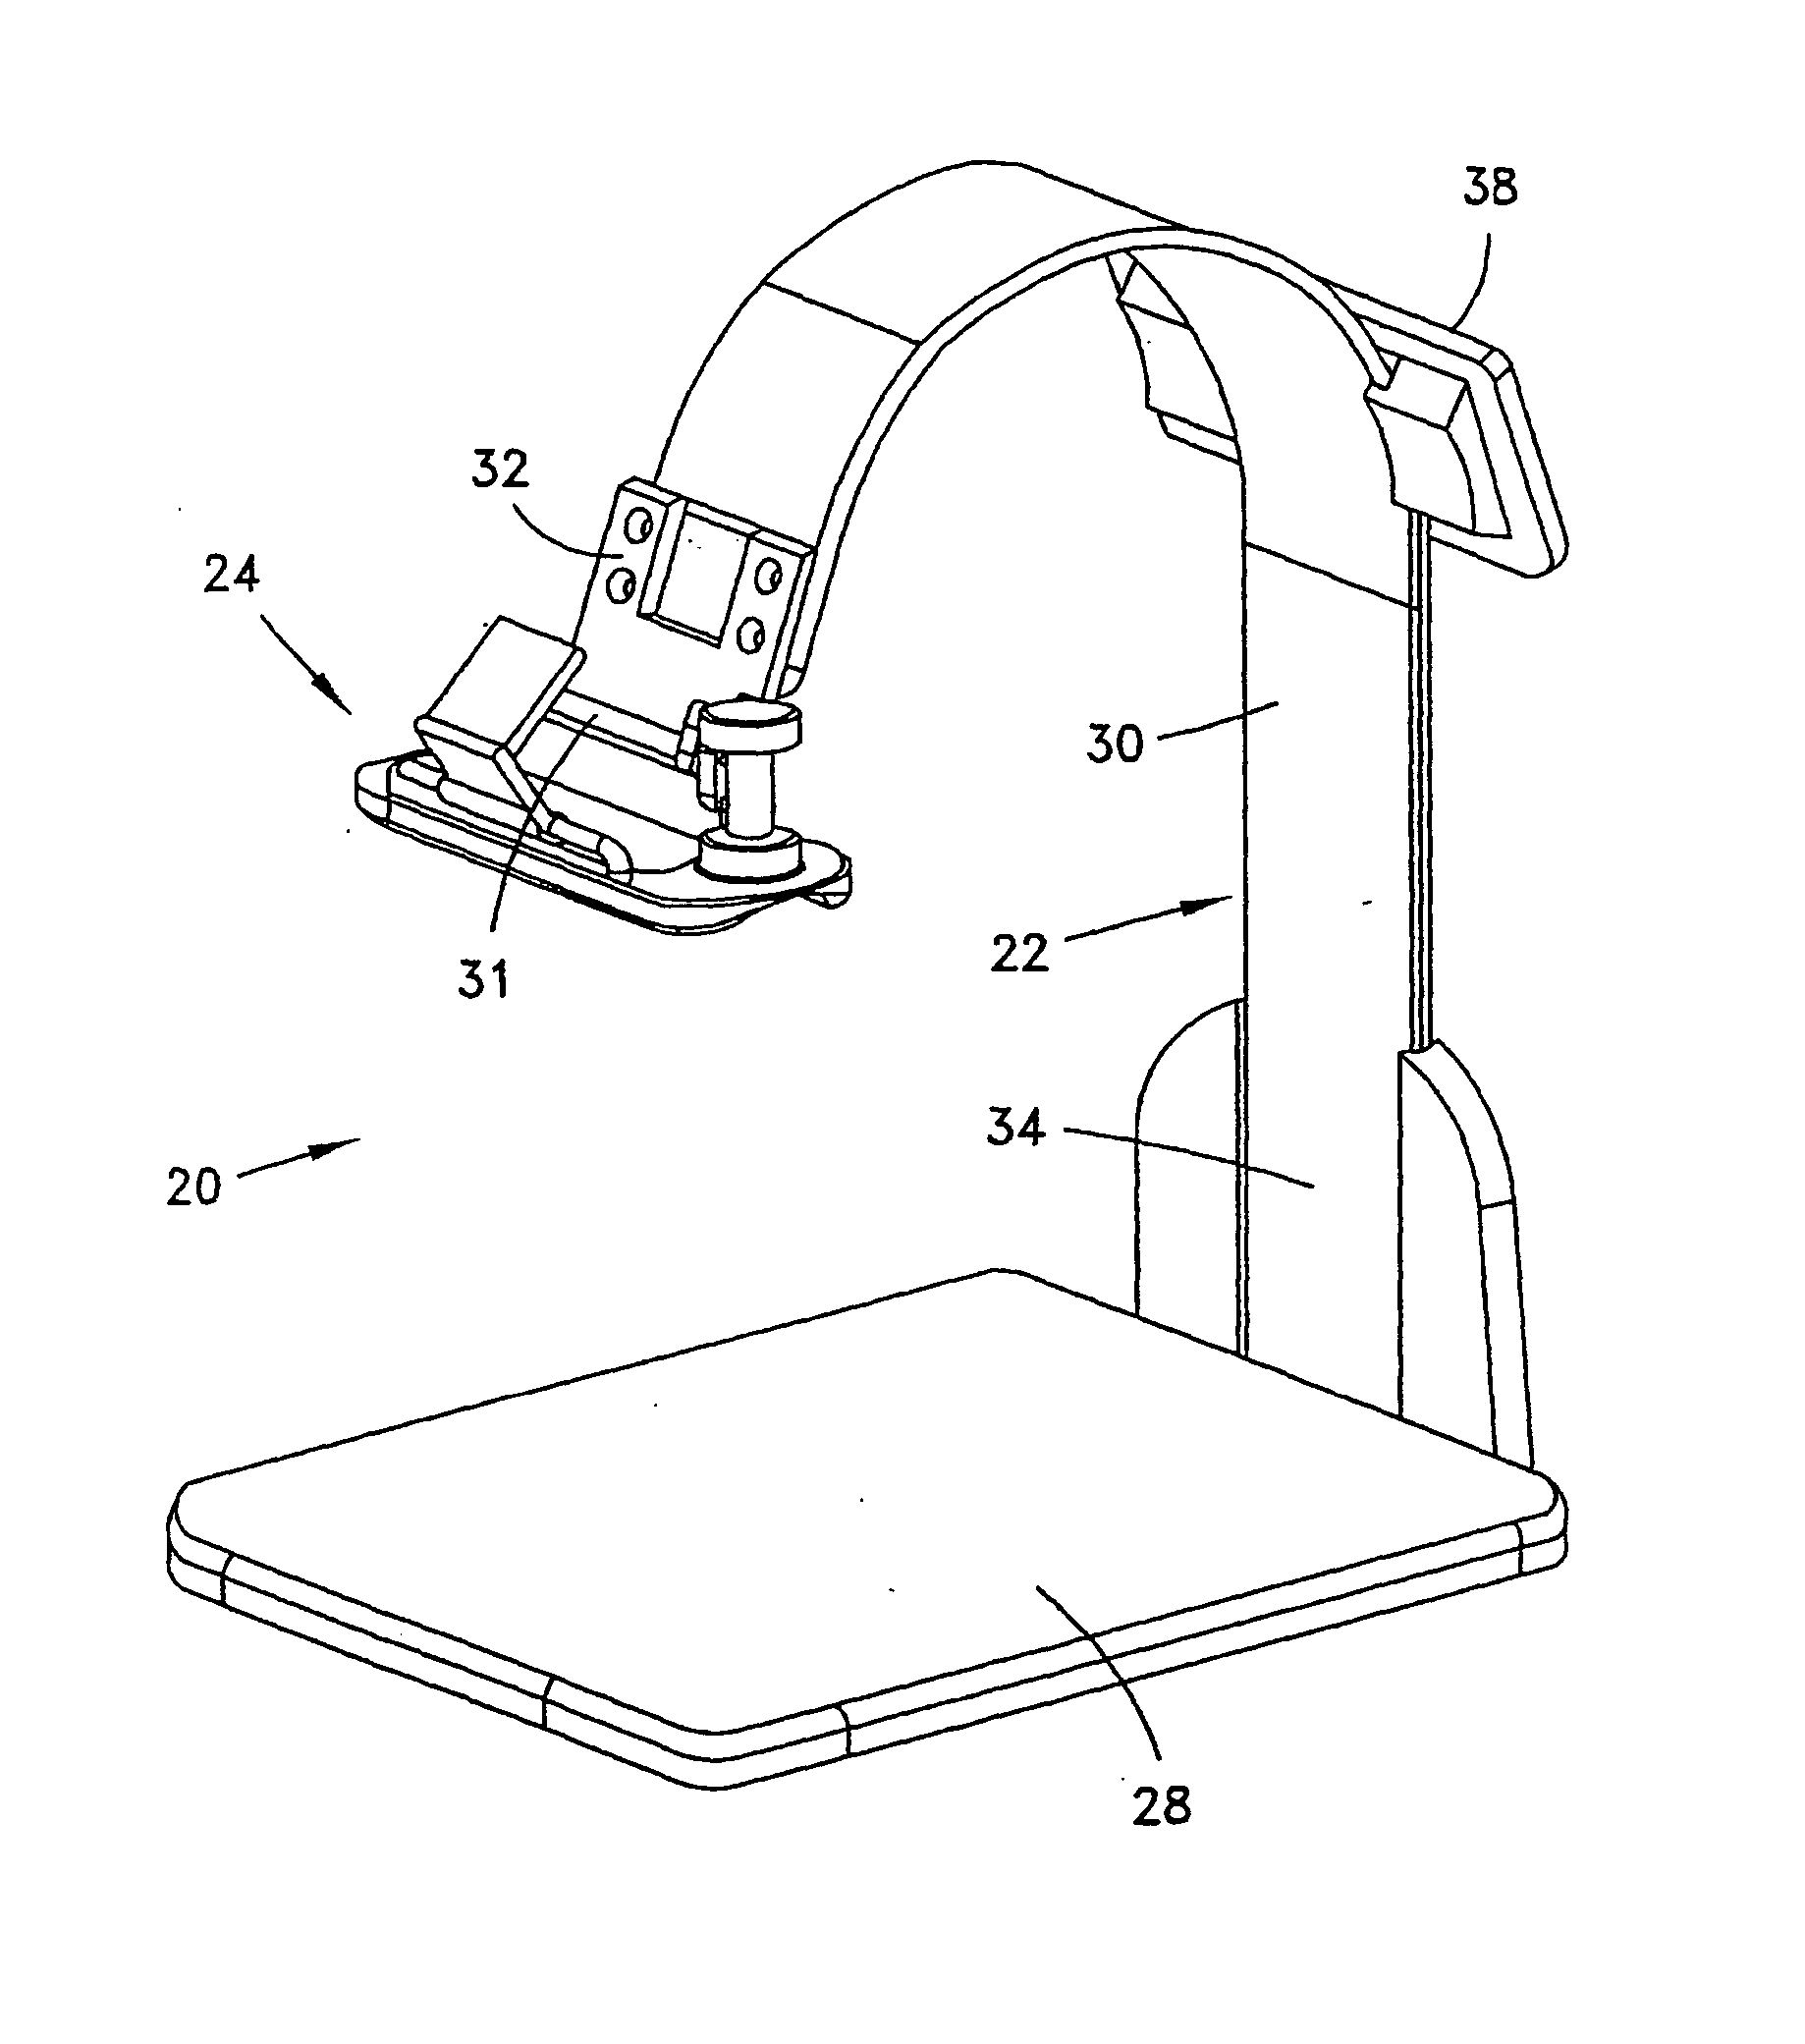 Apparatus for sealing a puncture in a blood vessel